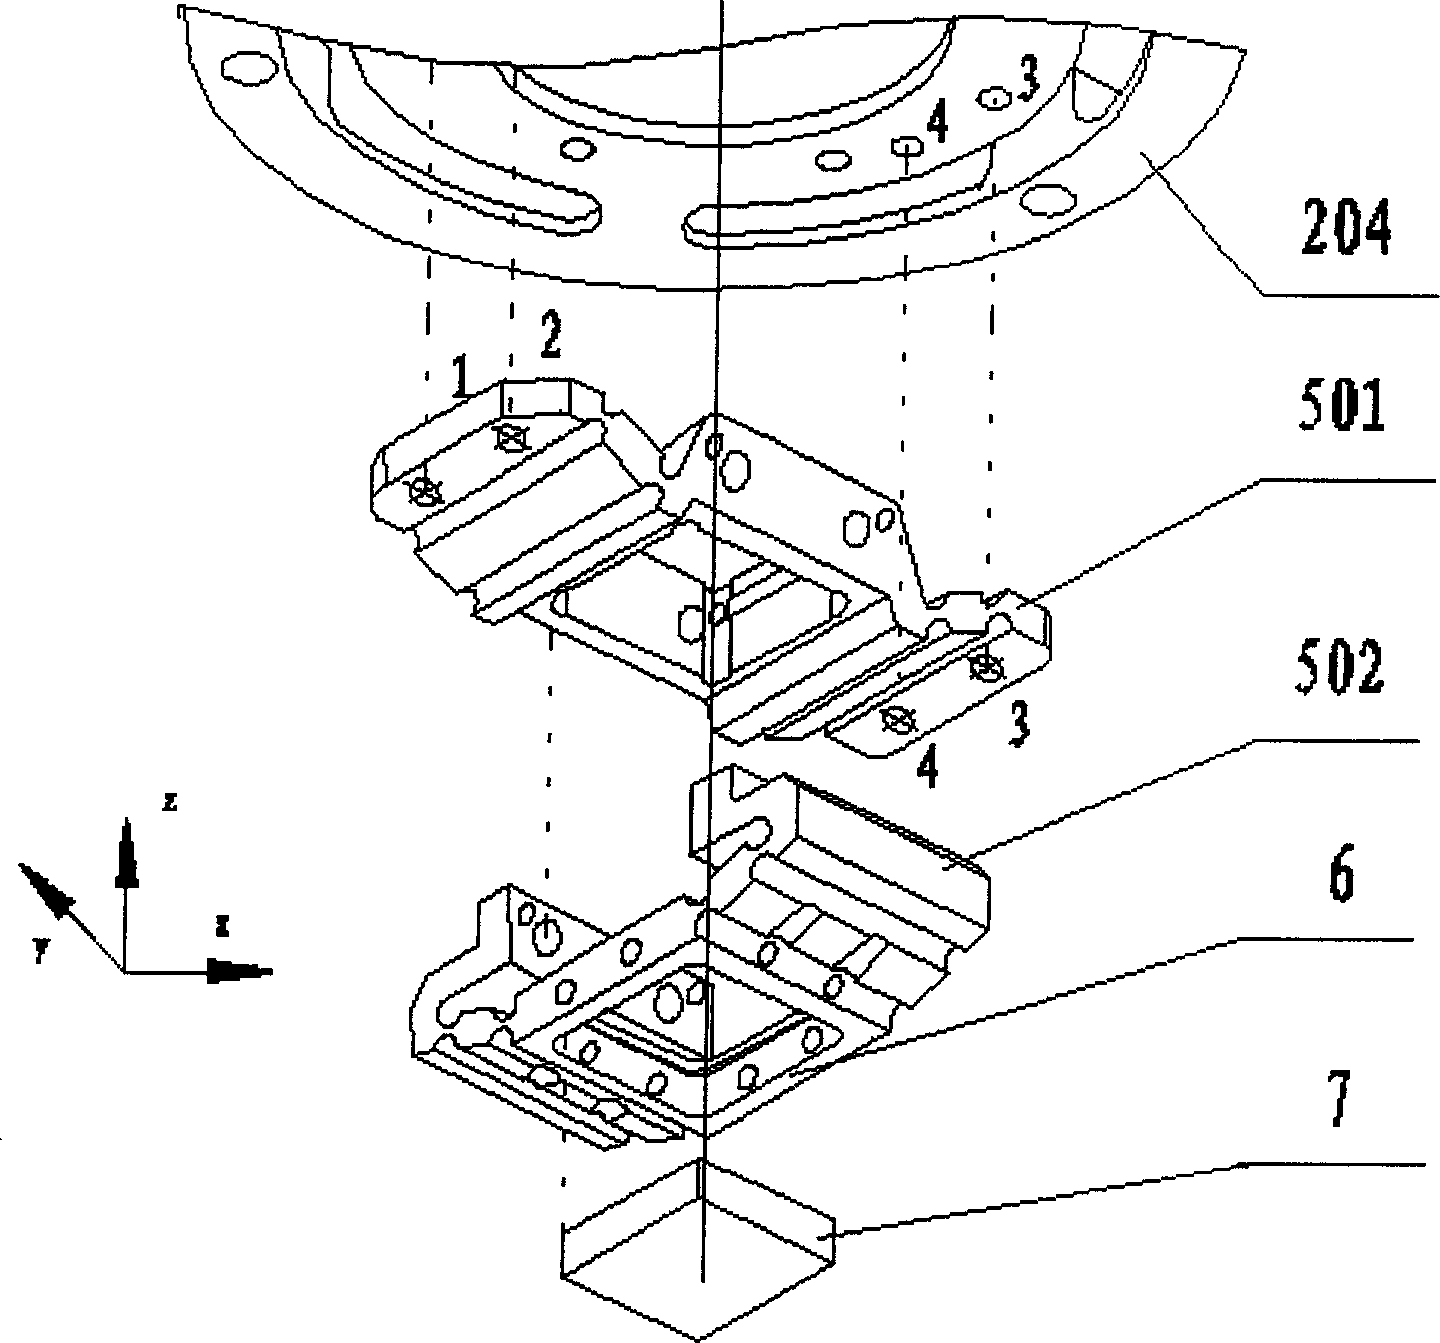 Stepped and repeated illuminating and nano-imprinting device